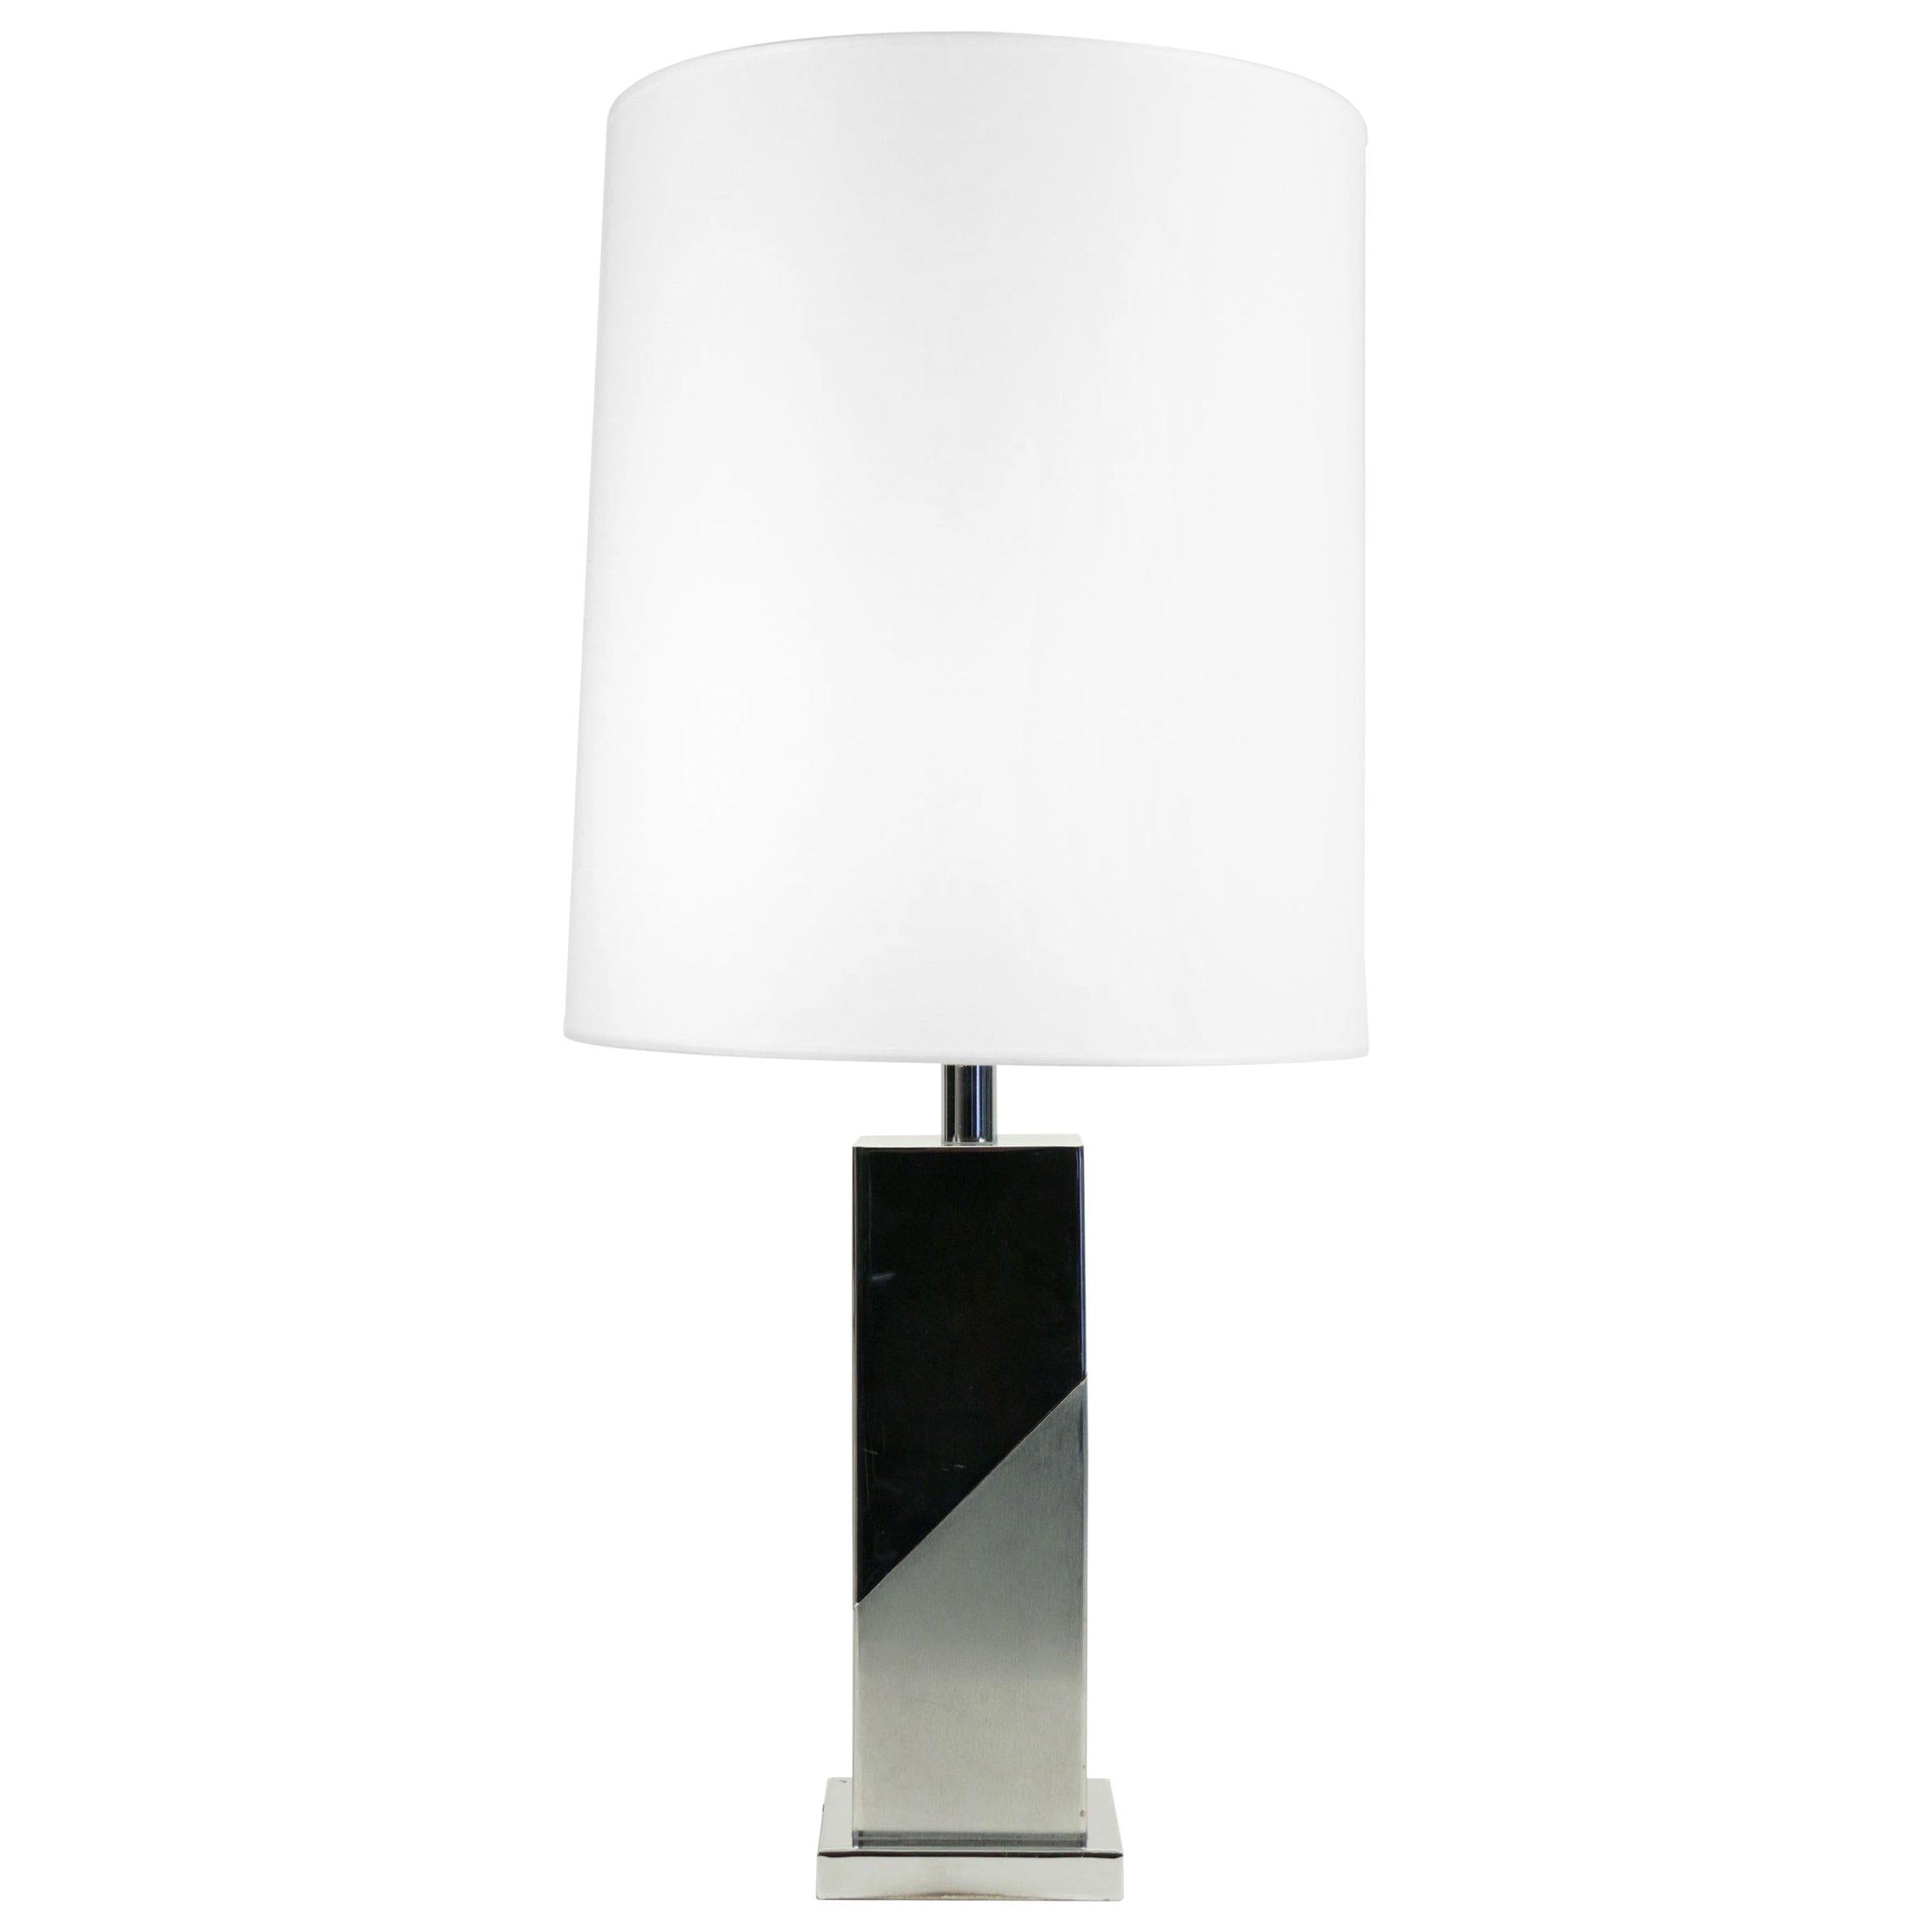 Lamp Inspired by the Cubist Movement or Brutalist